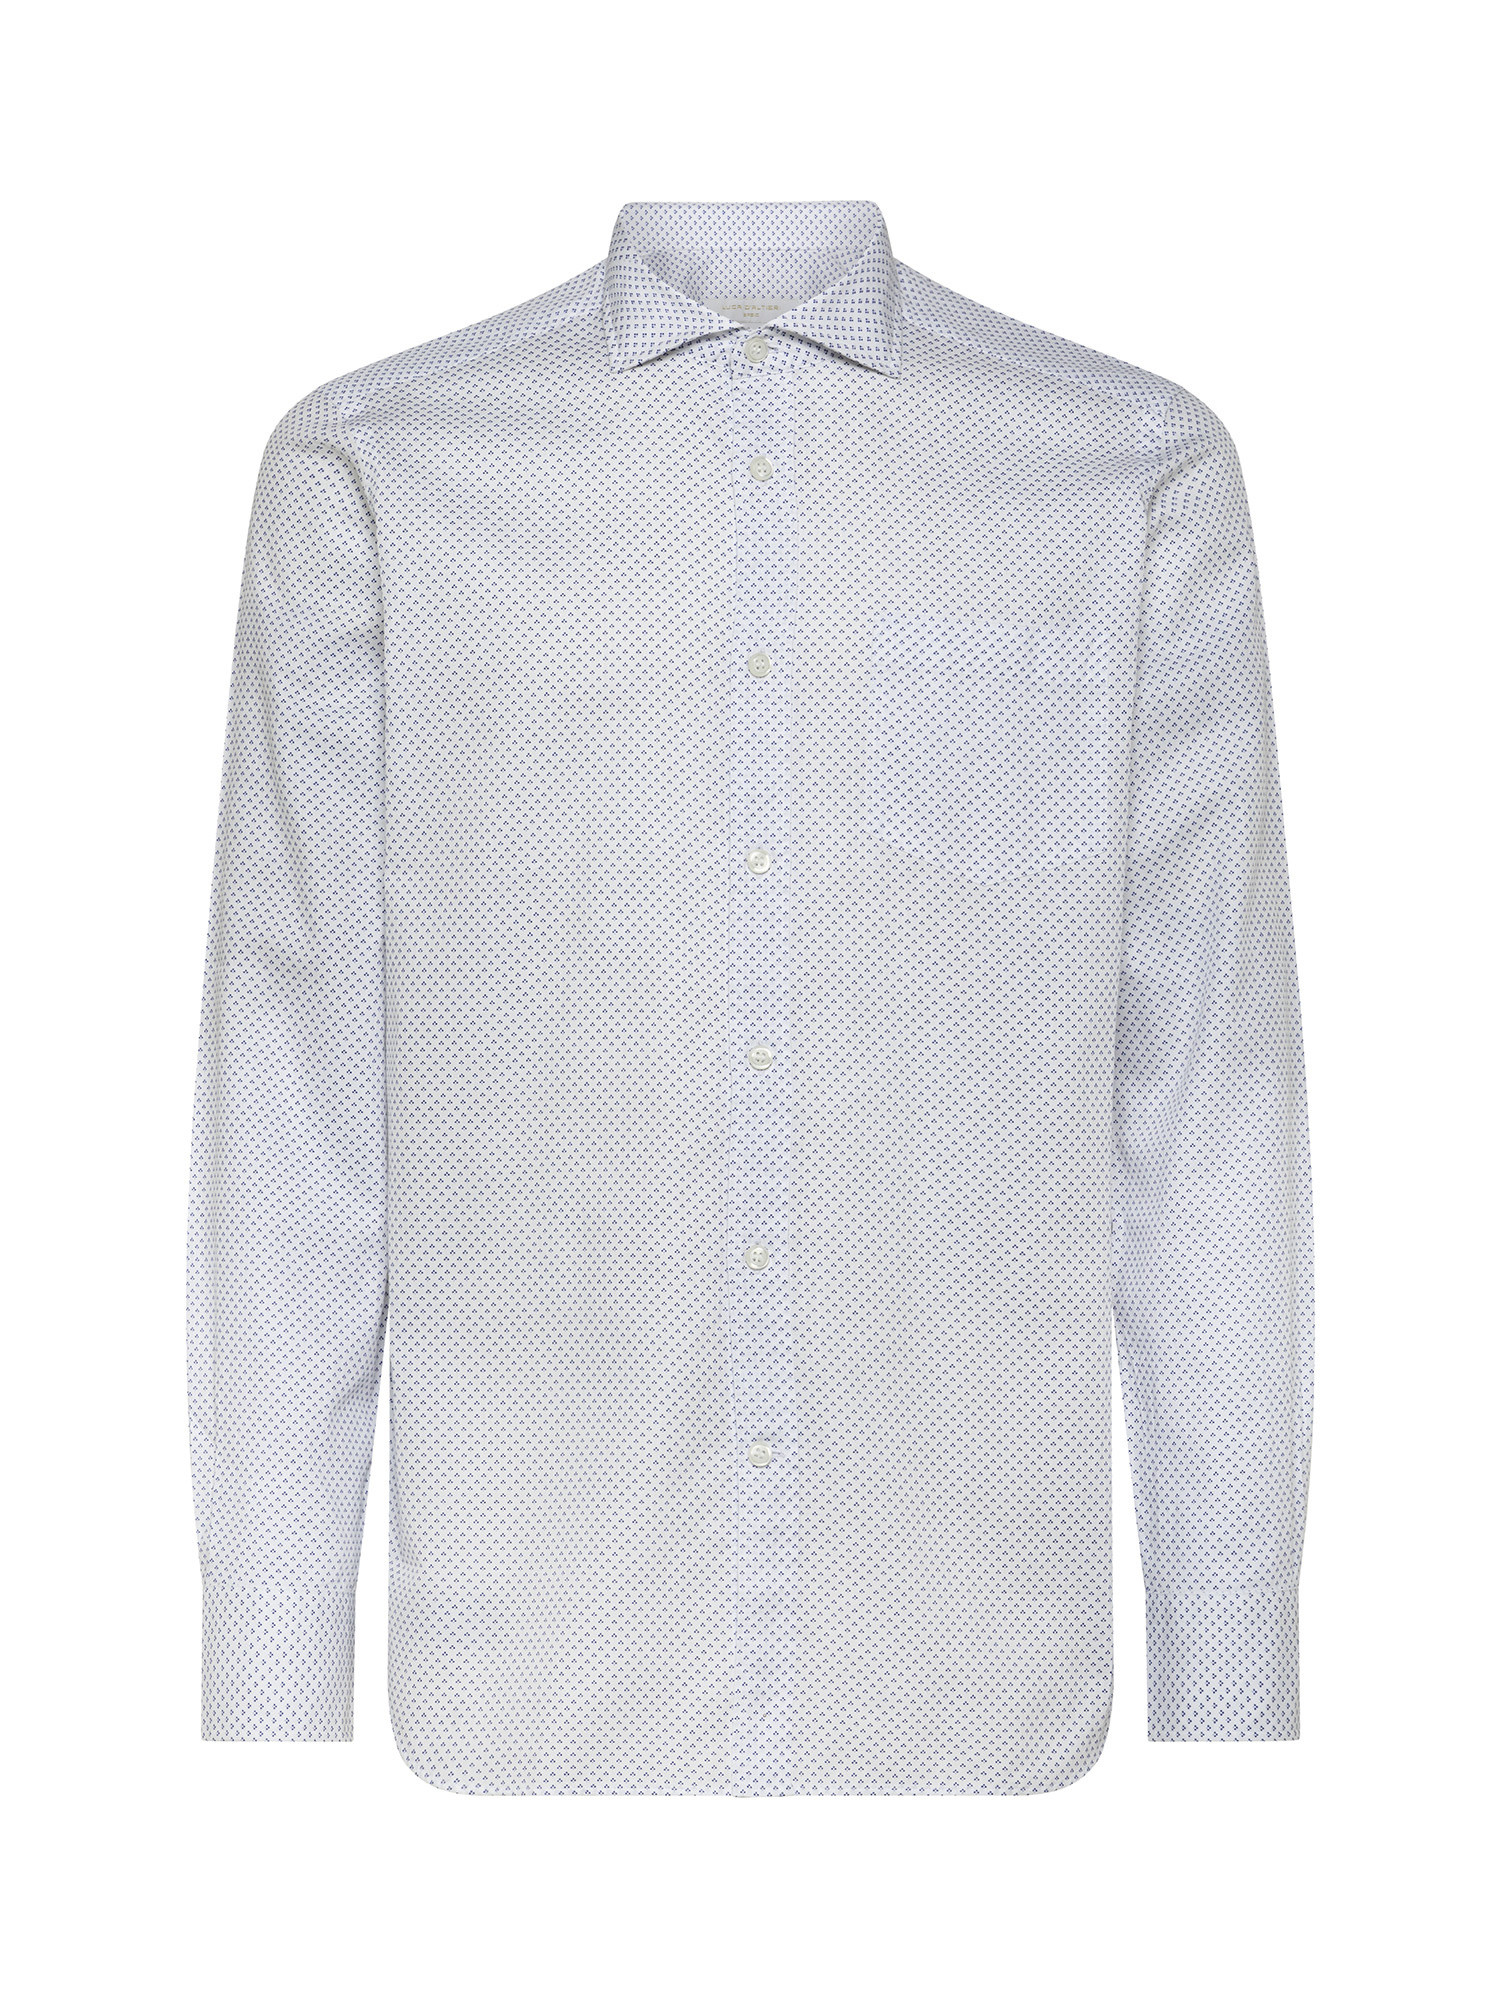 Camicia basic slim fit in puro cotone, Bianco 1, large image number 1